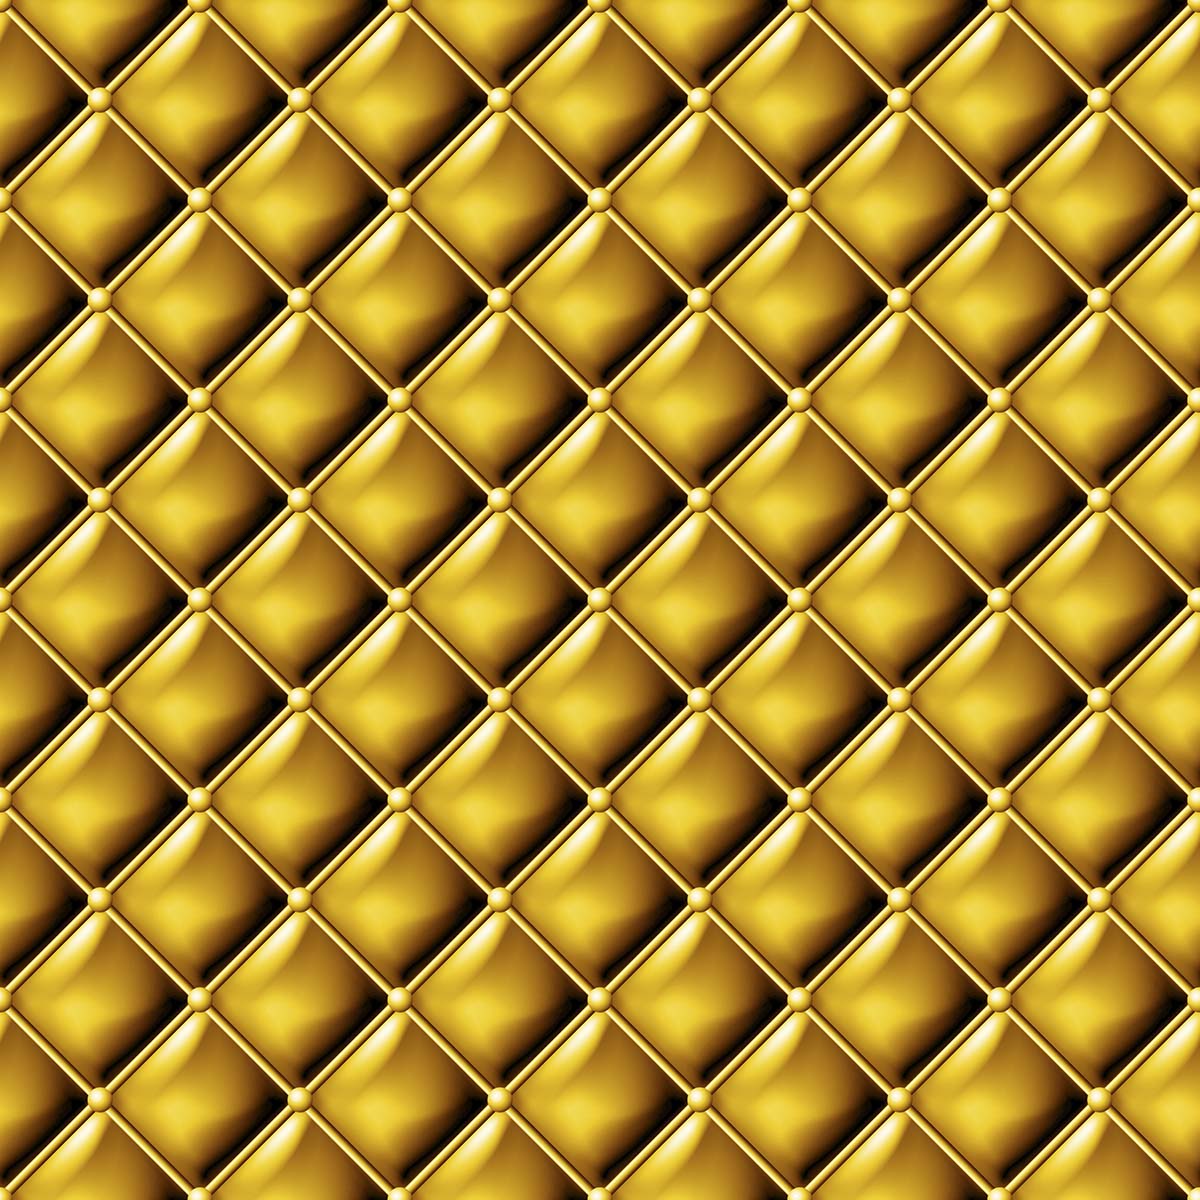 A close up of a gold quilted pattern